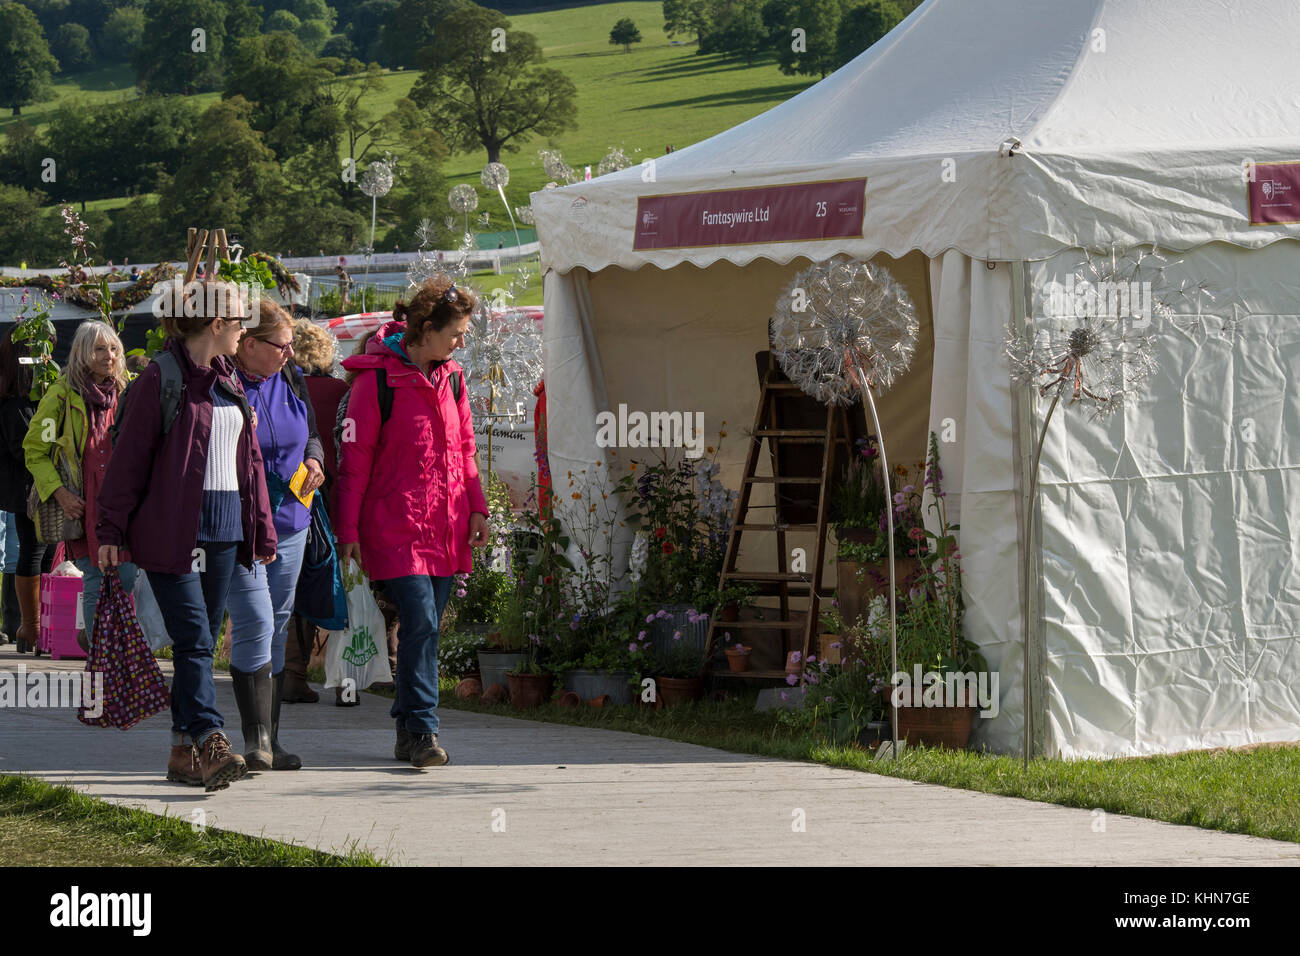 People at showground are walking past a trade stand looking at display of plants & sculptures -  RHS Chatsworth Flower Show, Derbyshire, England, UK. Stock Photo